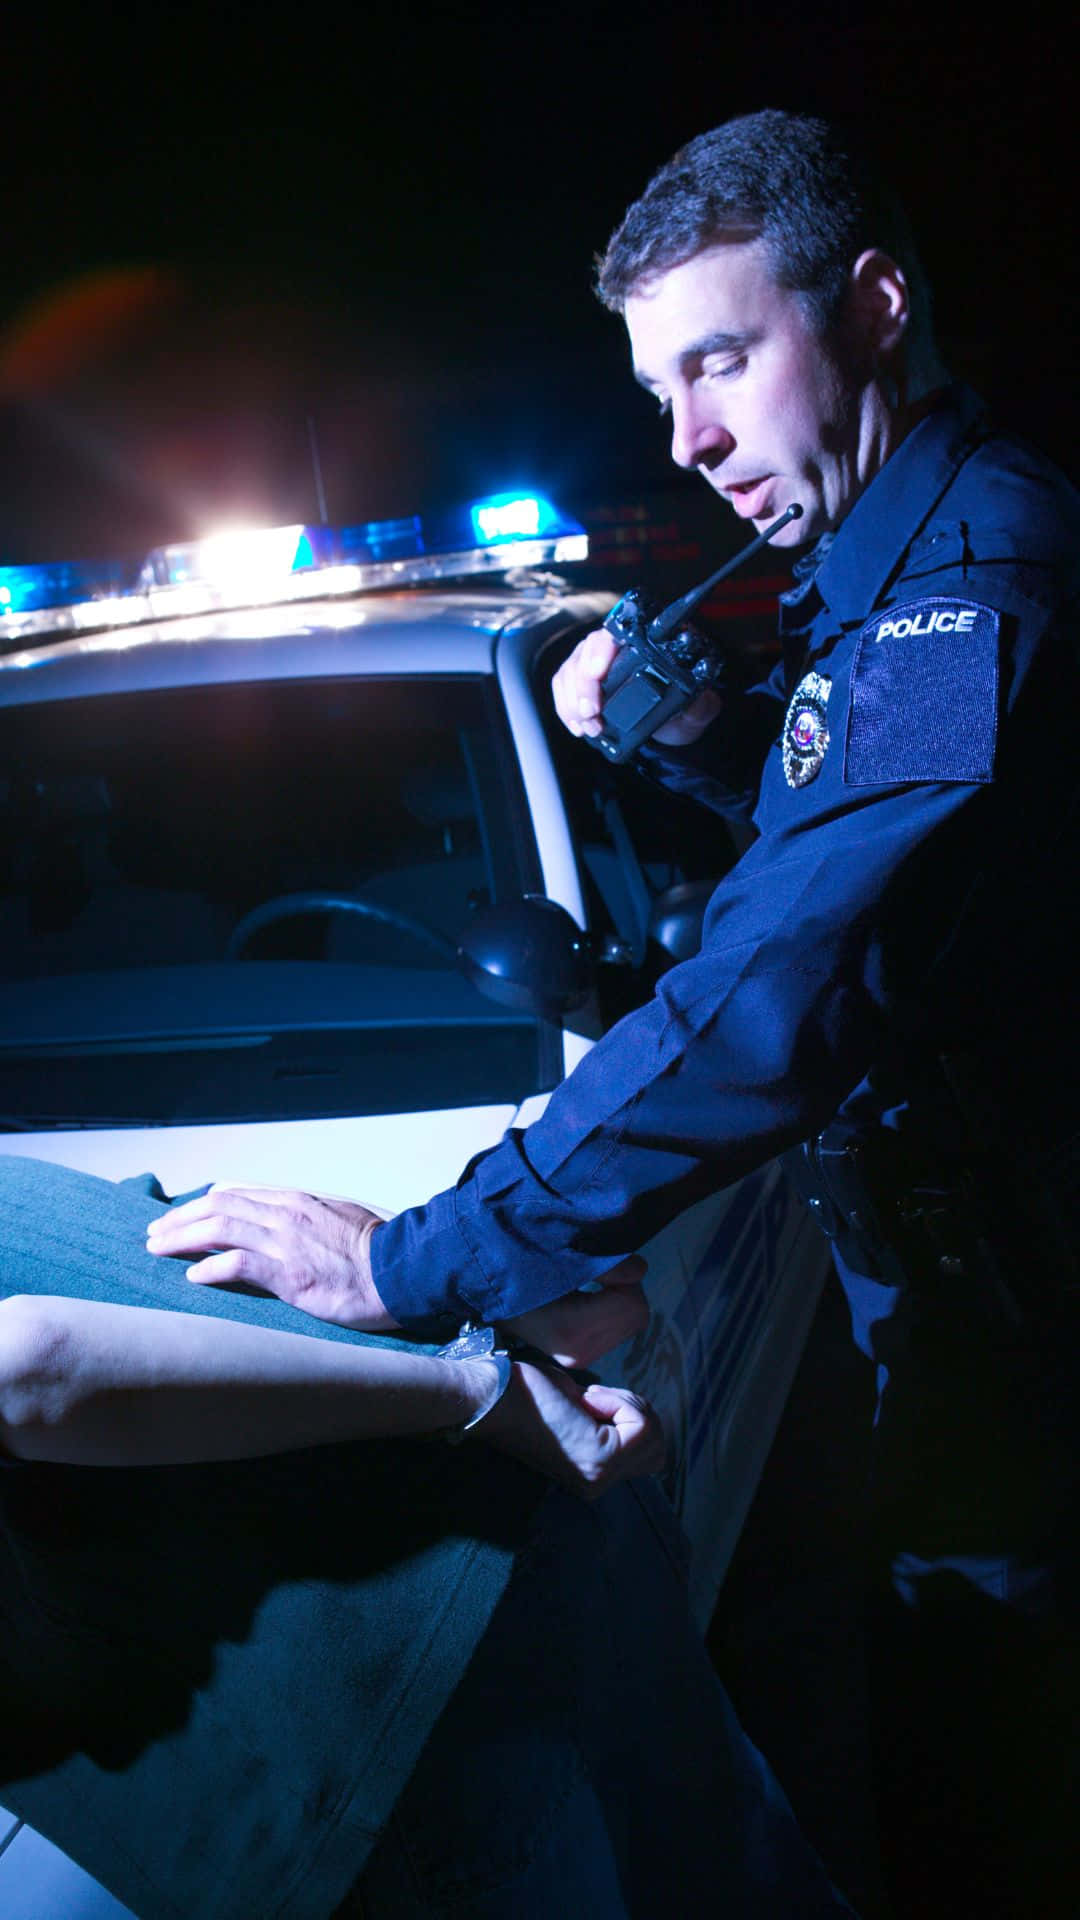 Cop Arresting A Man During Dui Checkpoint Background